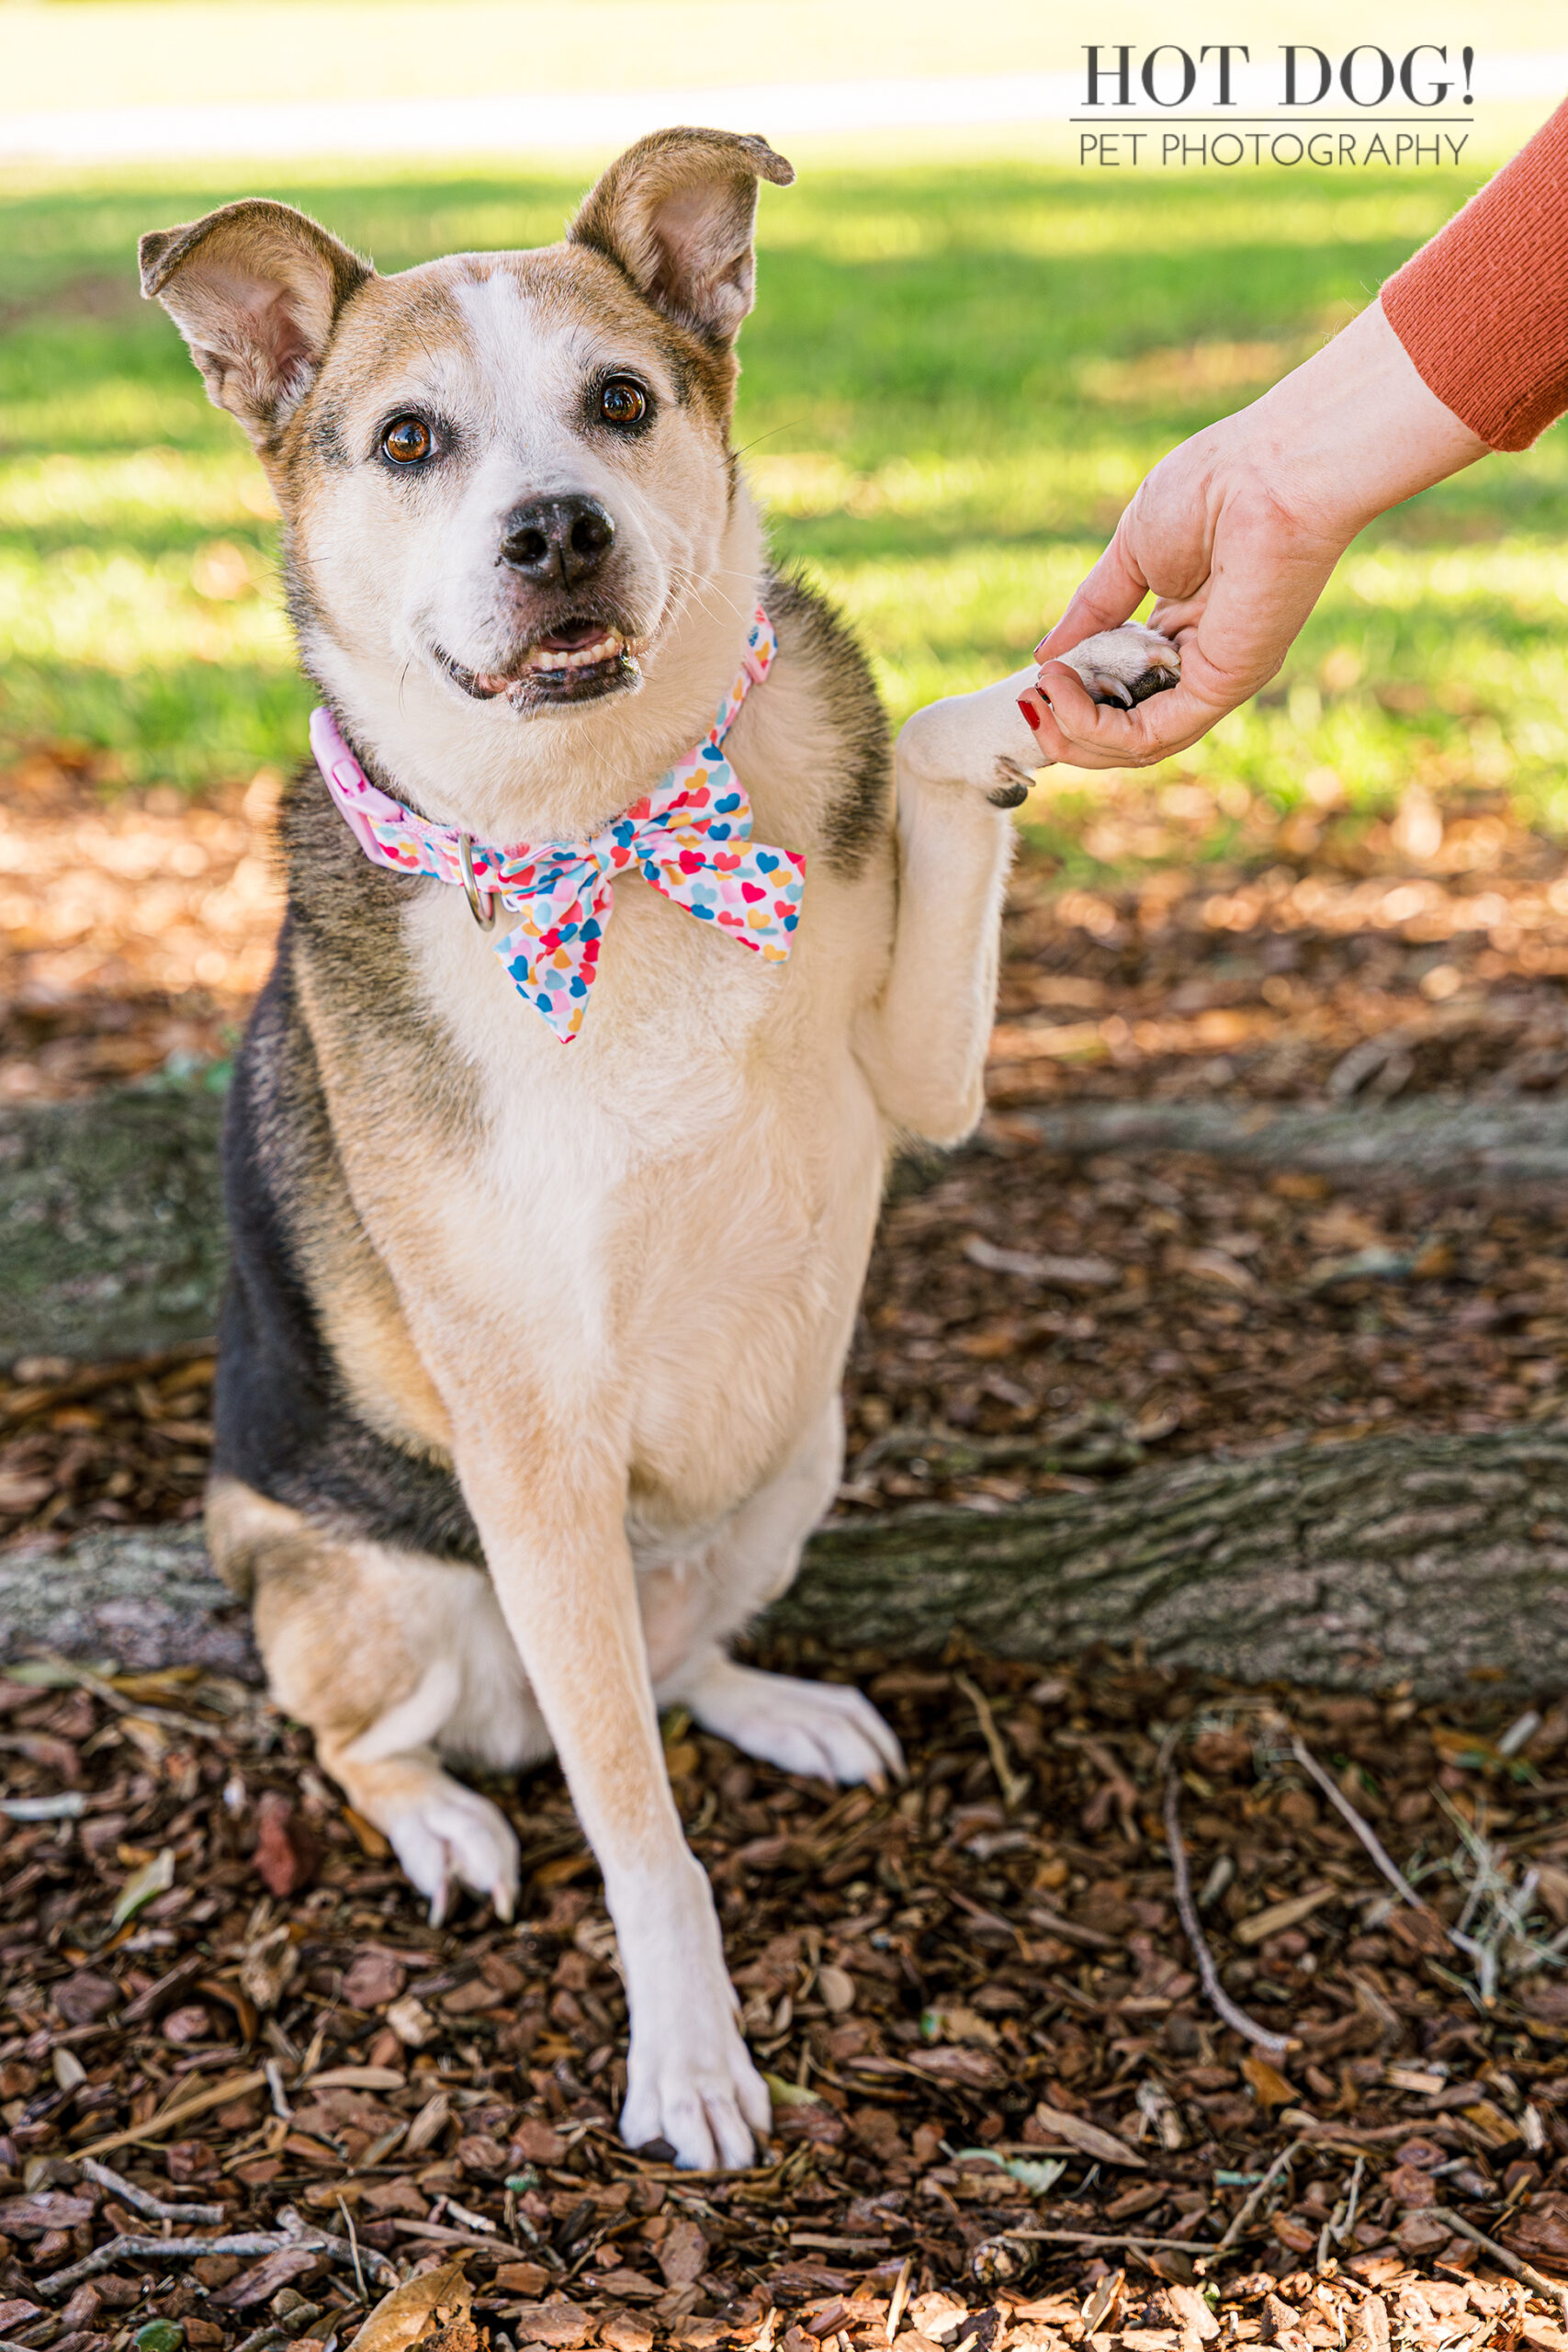 Sit and Shake: Zoe shakes hands with her mom at Newton Park. (Photo by Hot Dog! Pet Photography)